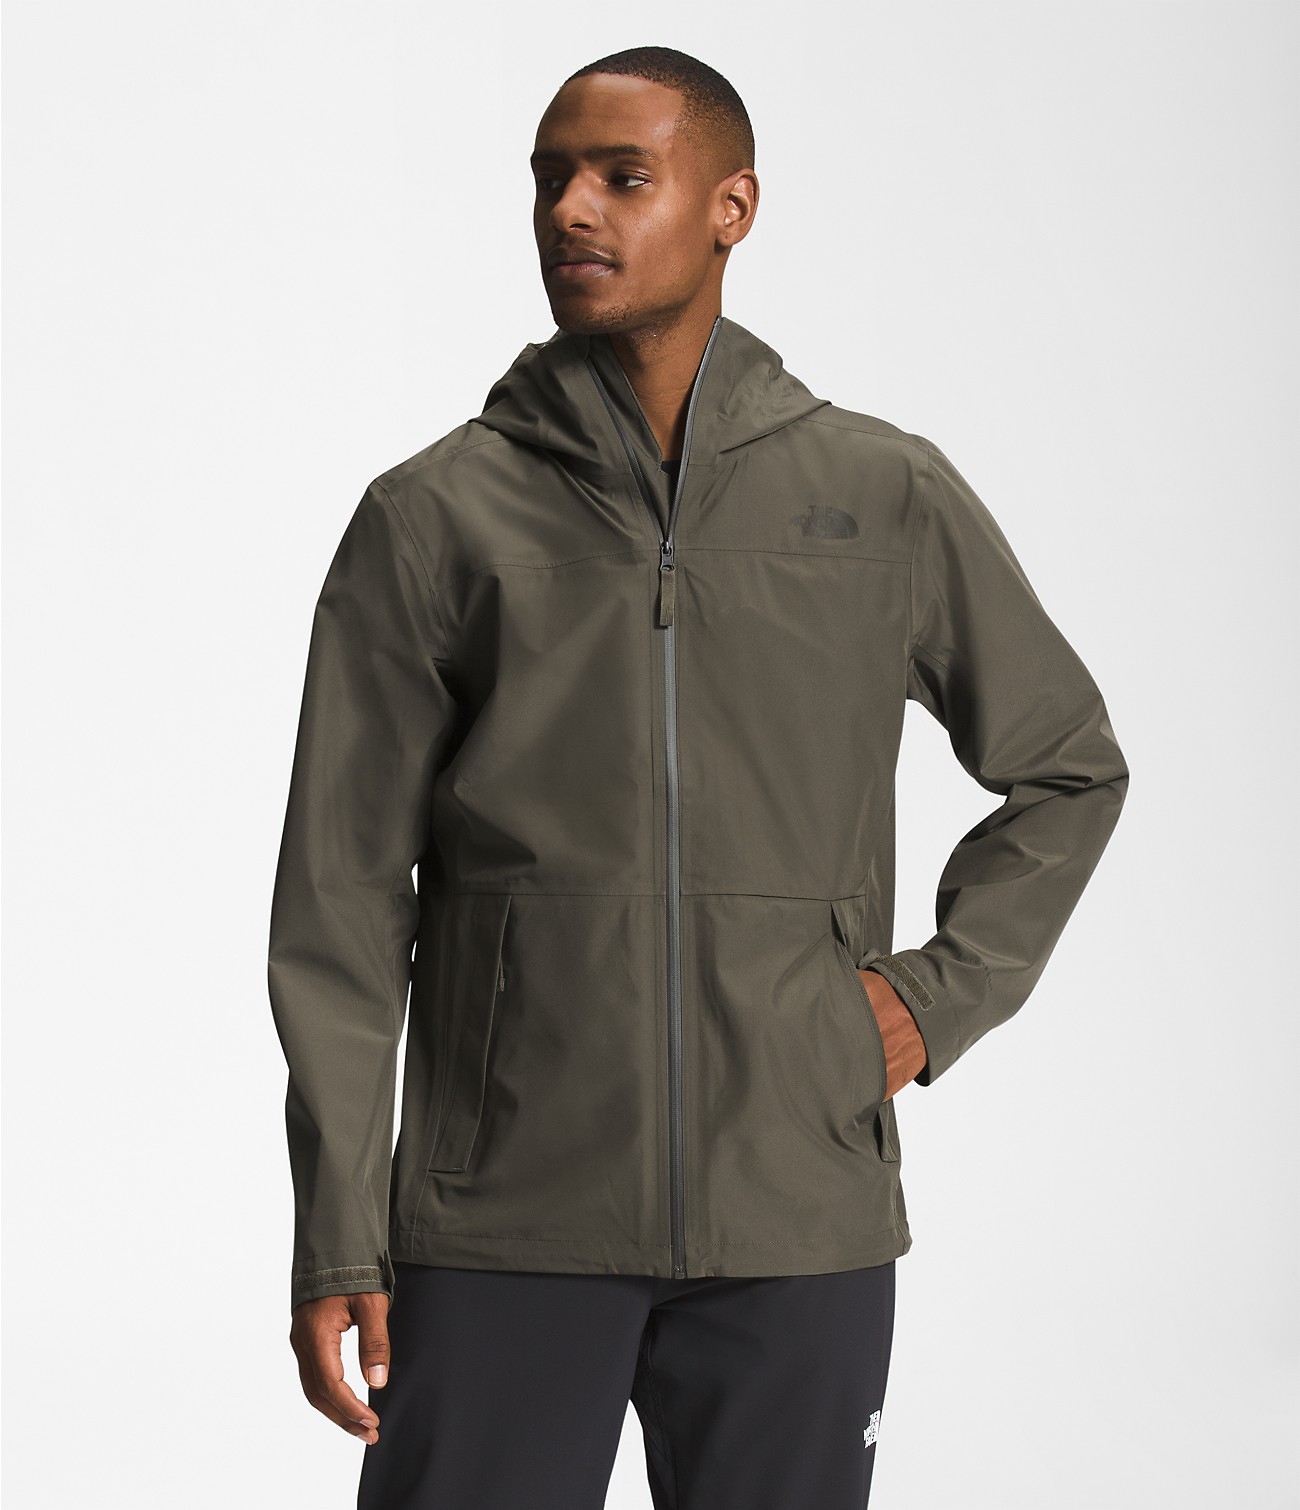 Unlock Wilderness' choice in the Mountain Hardwear Vs North Face comparison, the Dryzzle FUTURELIGHT™ Jacket by The North Face